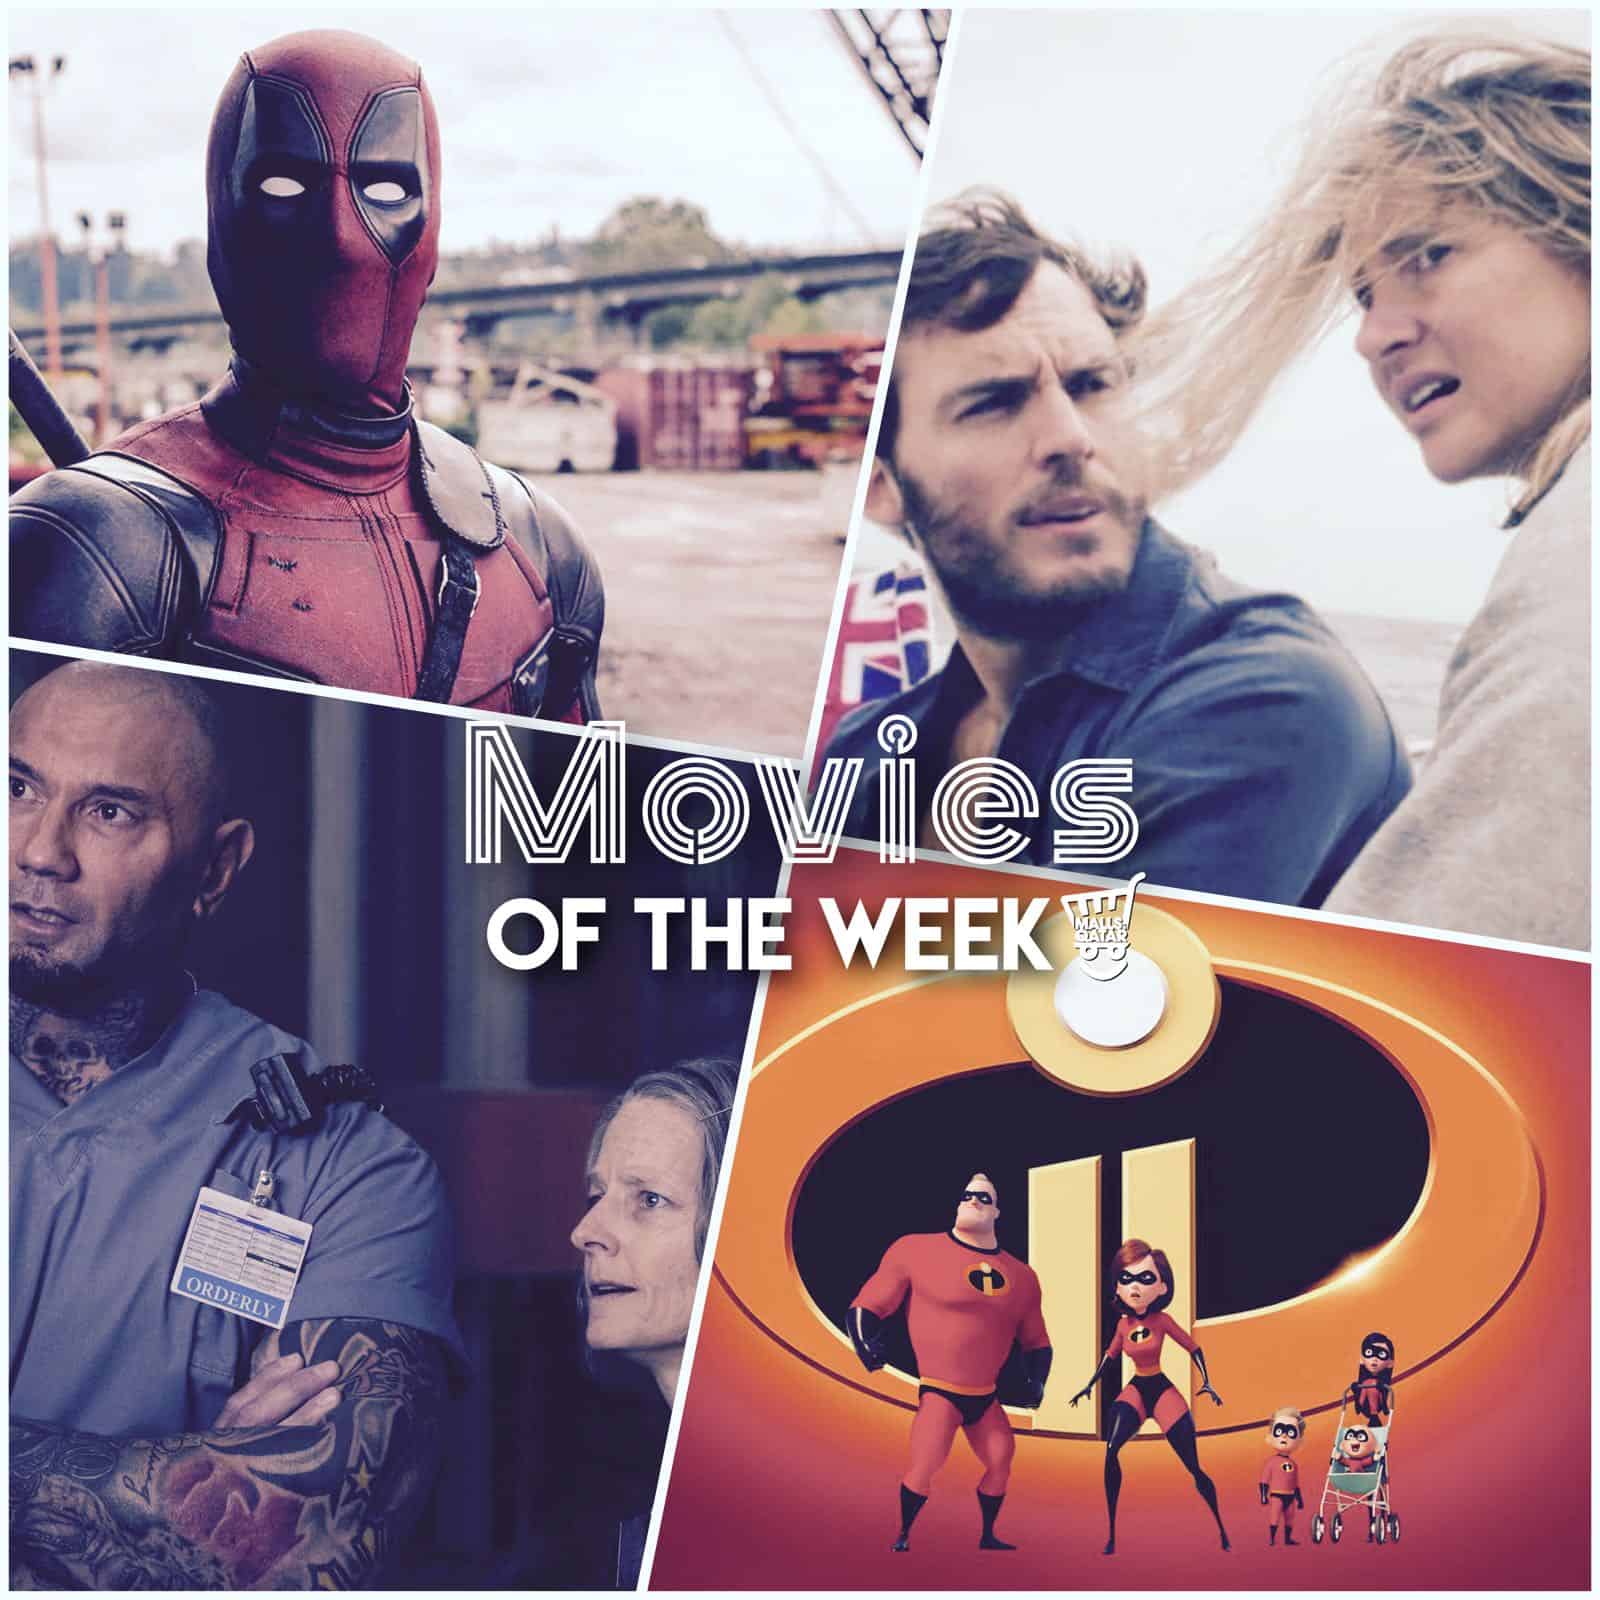 check out movies of the week